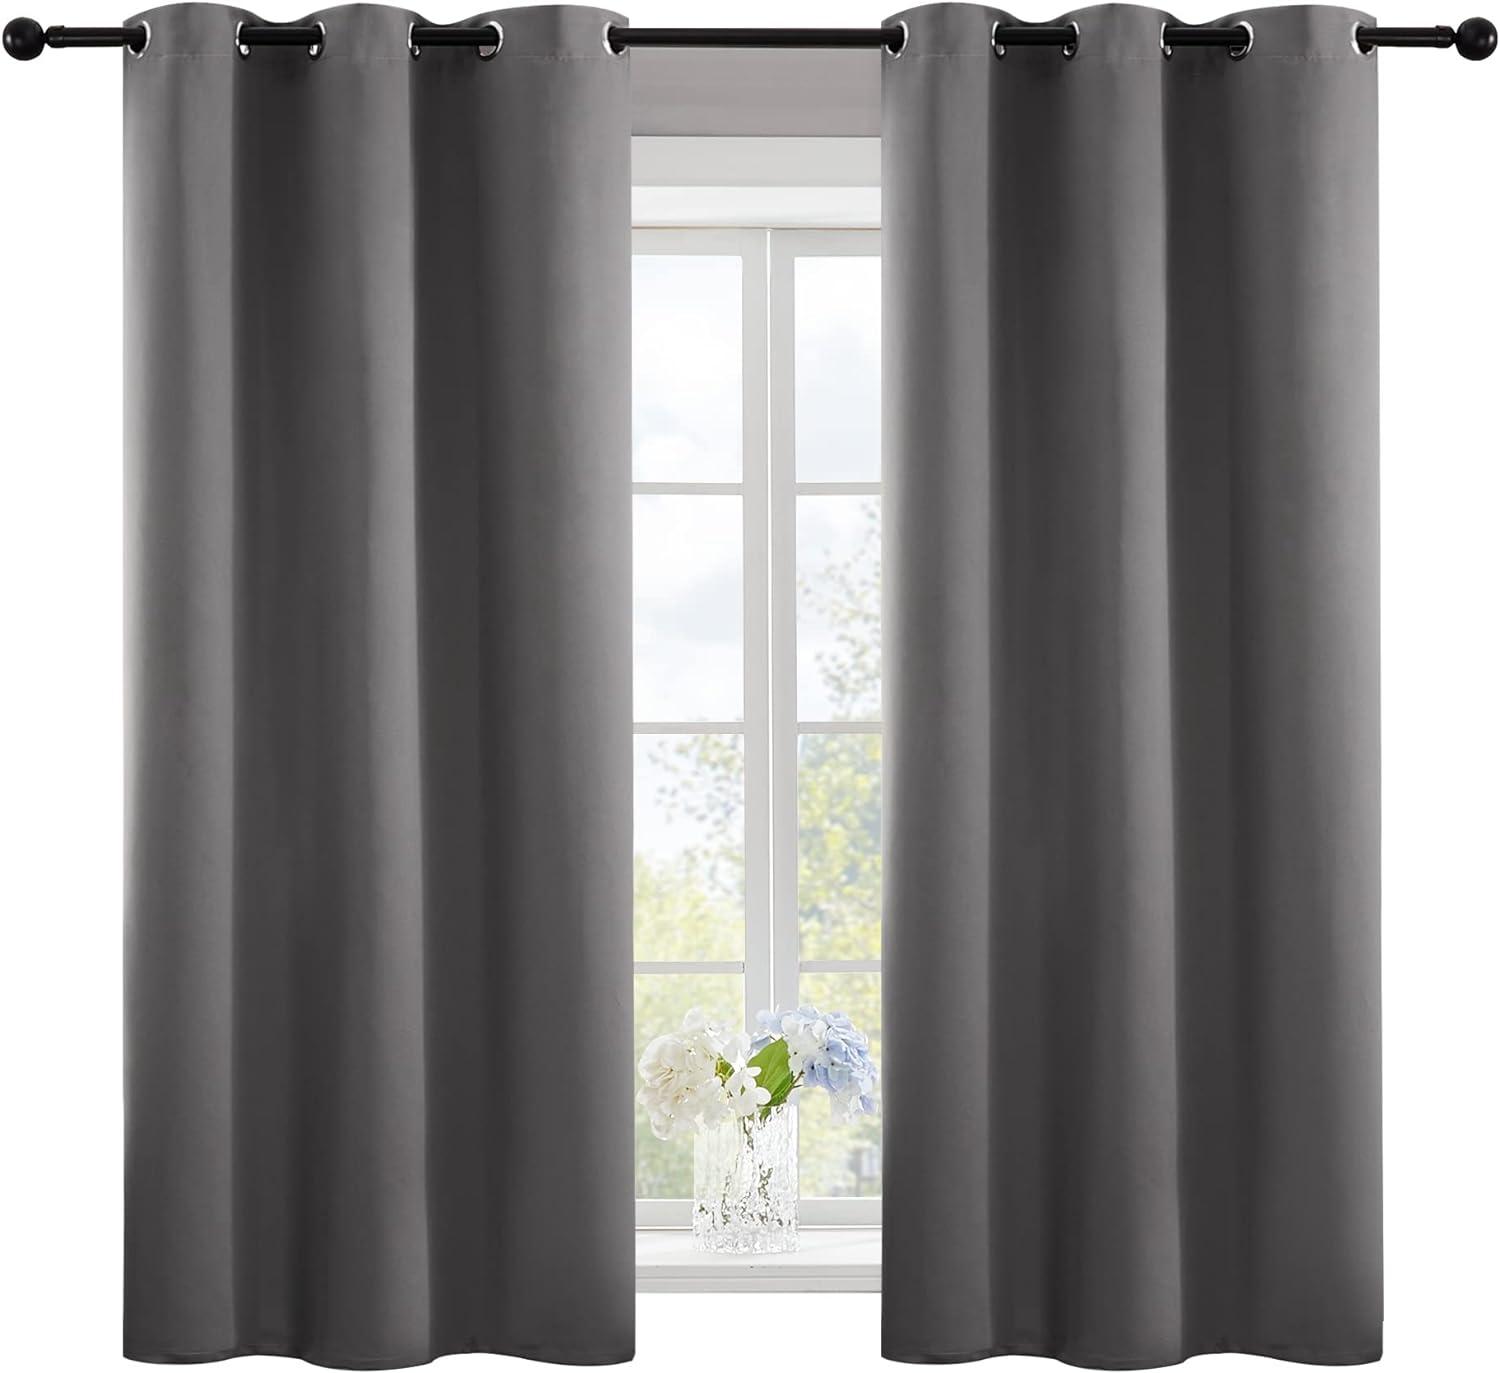 Deconovo Thermal Insulated Portable Grommet Blackout Curtains for $10.41